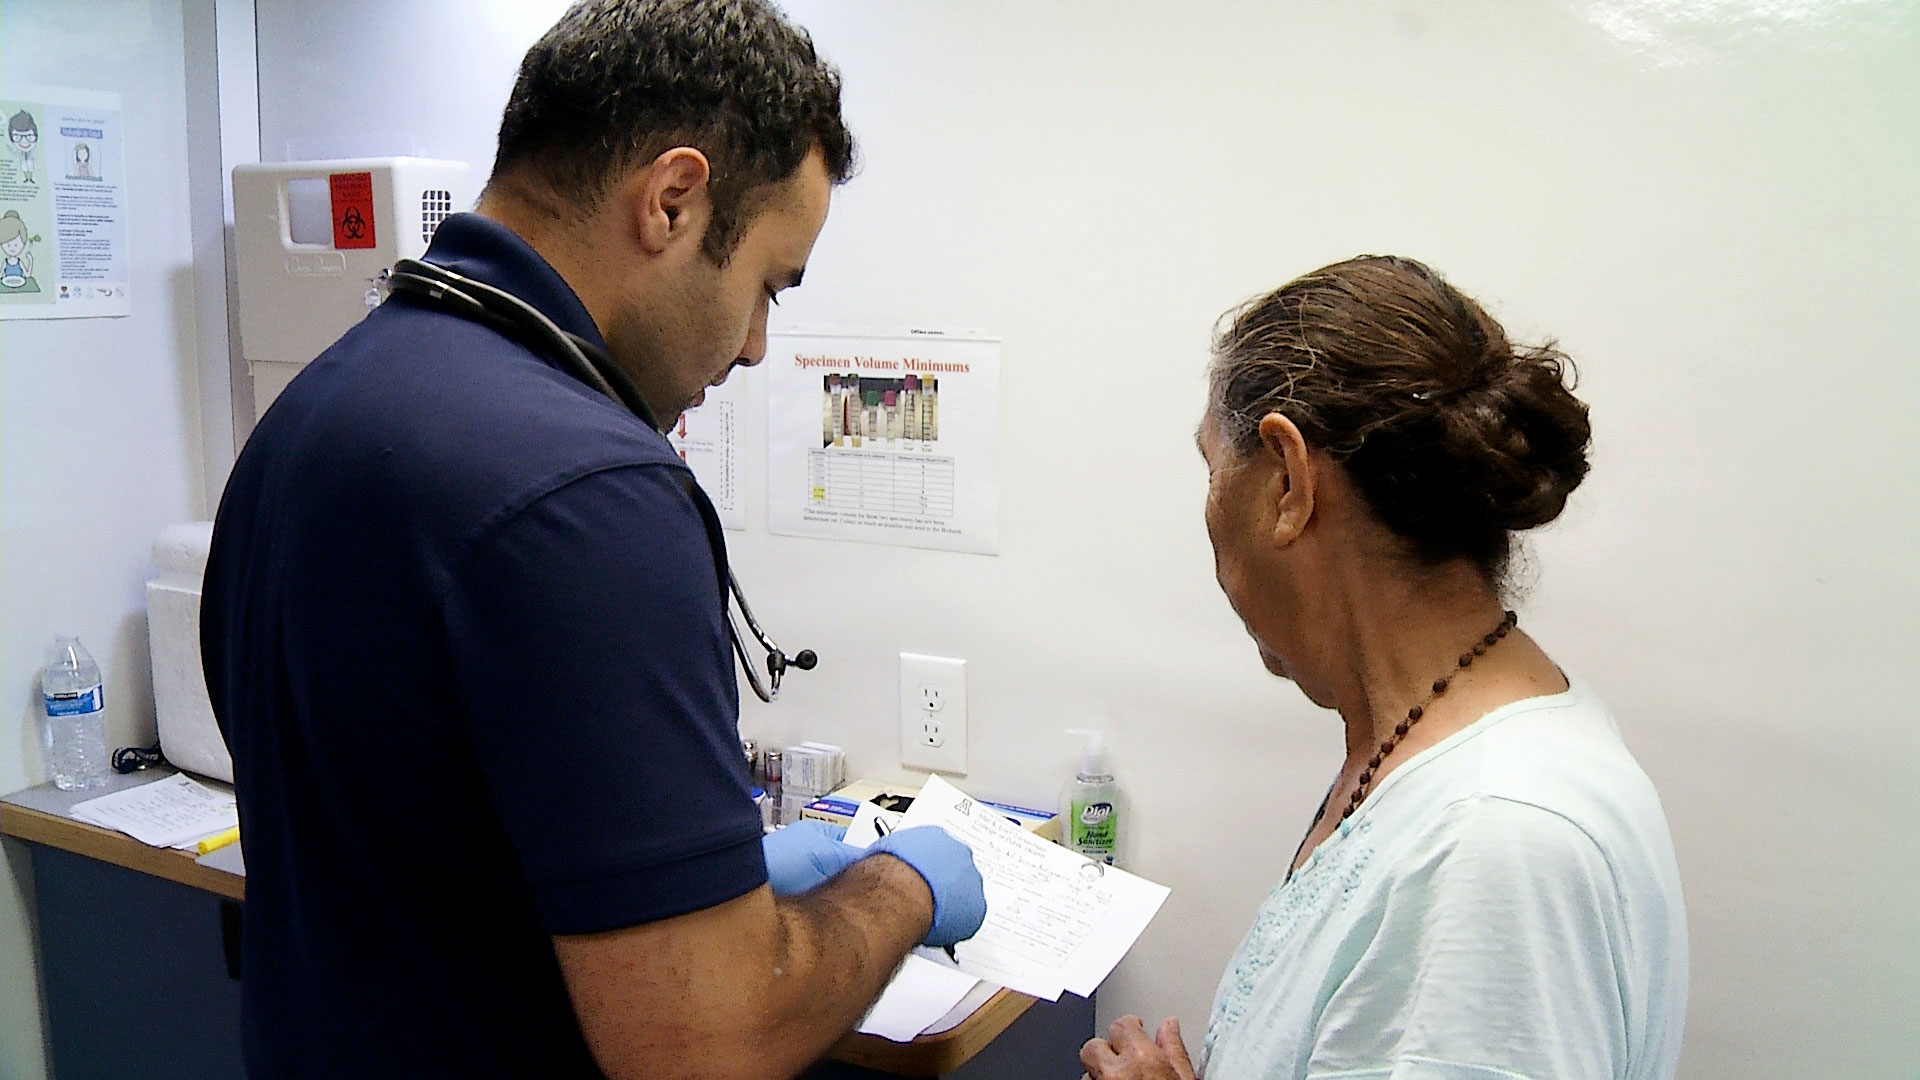 A community health worker with the University of Arizona talks to a client during a mobile health screening event in Arizona in this photo taken prior to the COVID-19 pandemic.